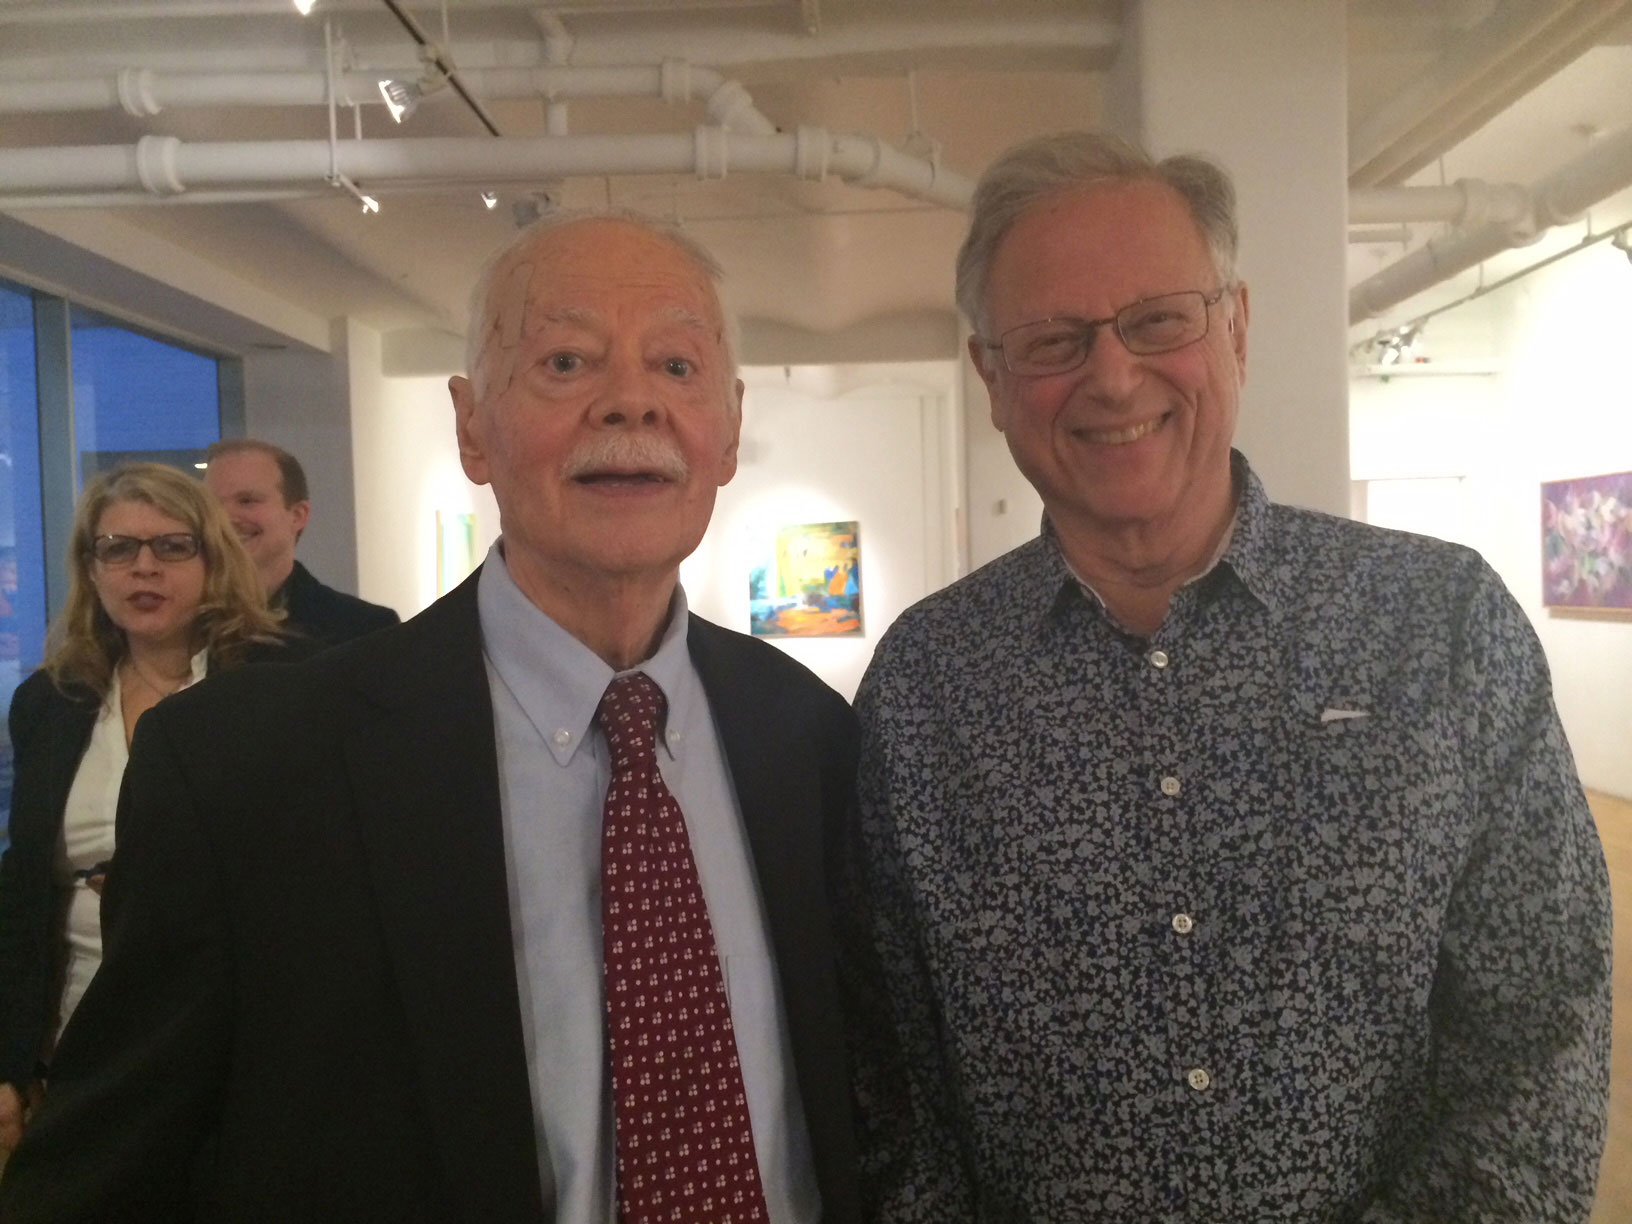 Richard Hundley and Paul Sperry in 2014.